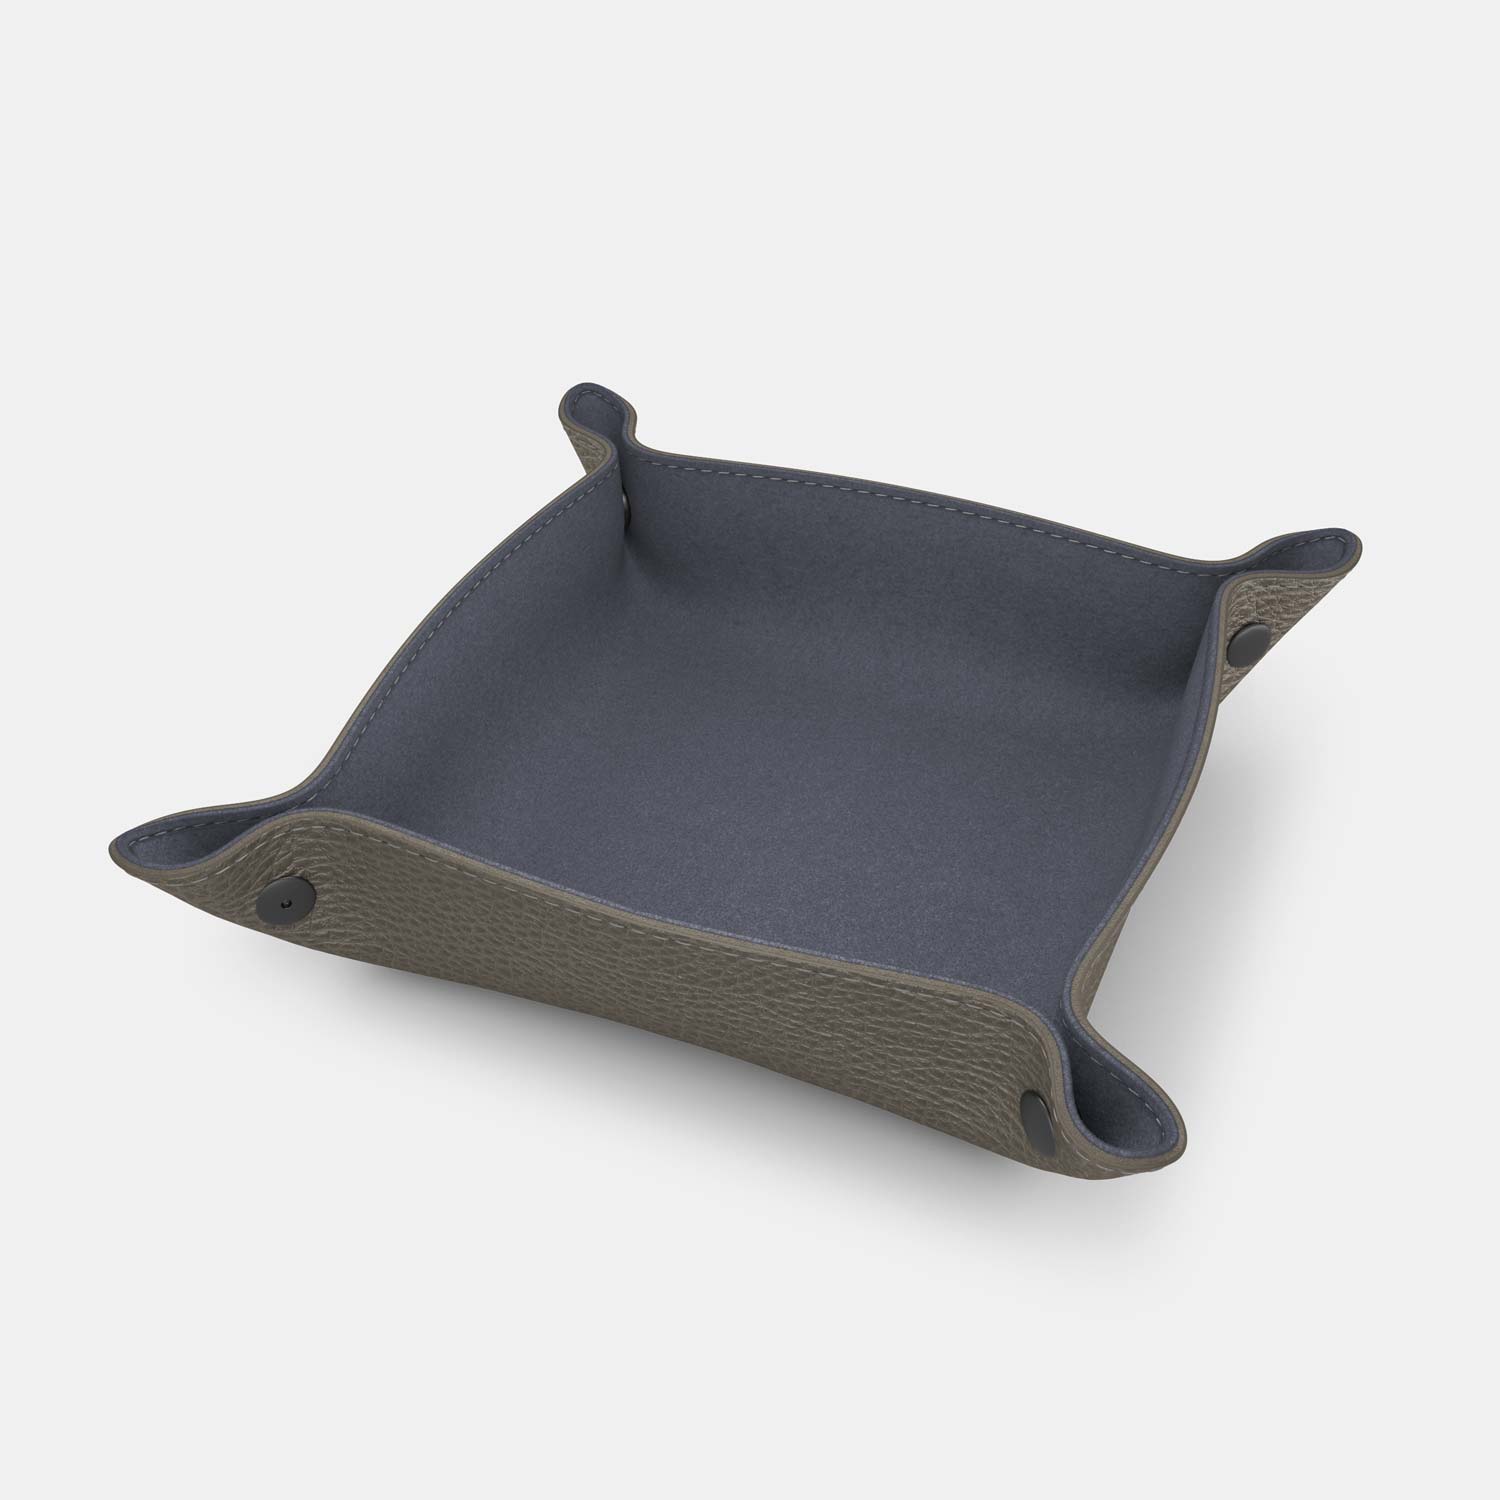 Leather Catch-all Tray - Grey and Grey - RYAN London